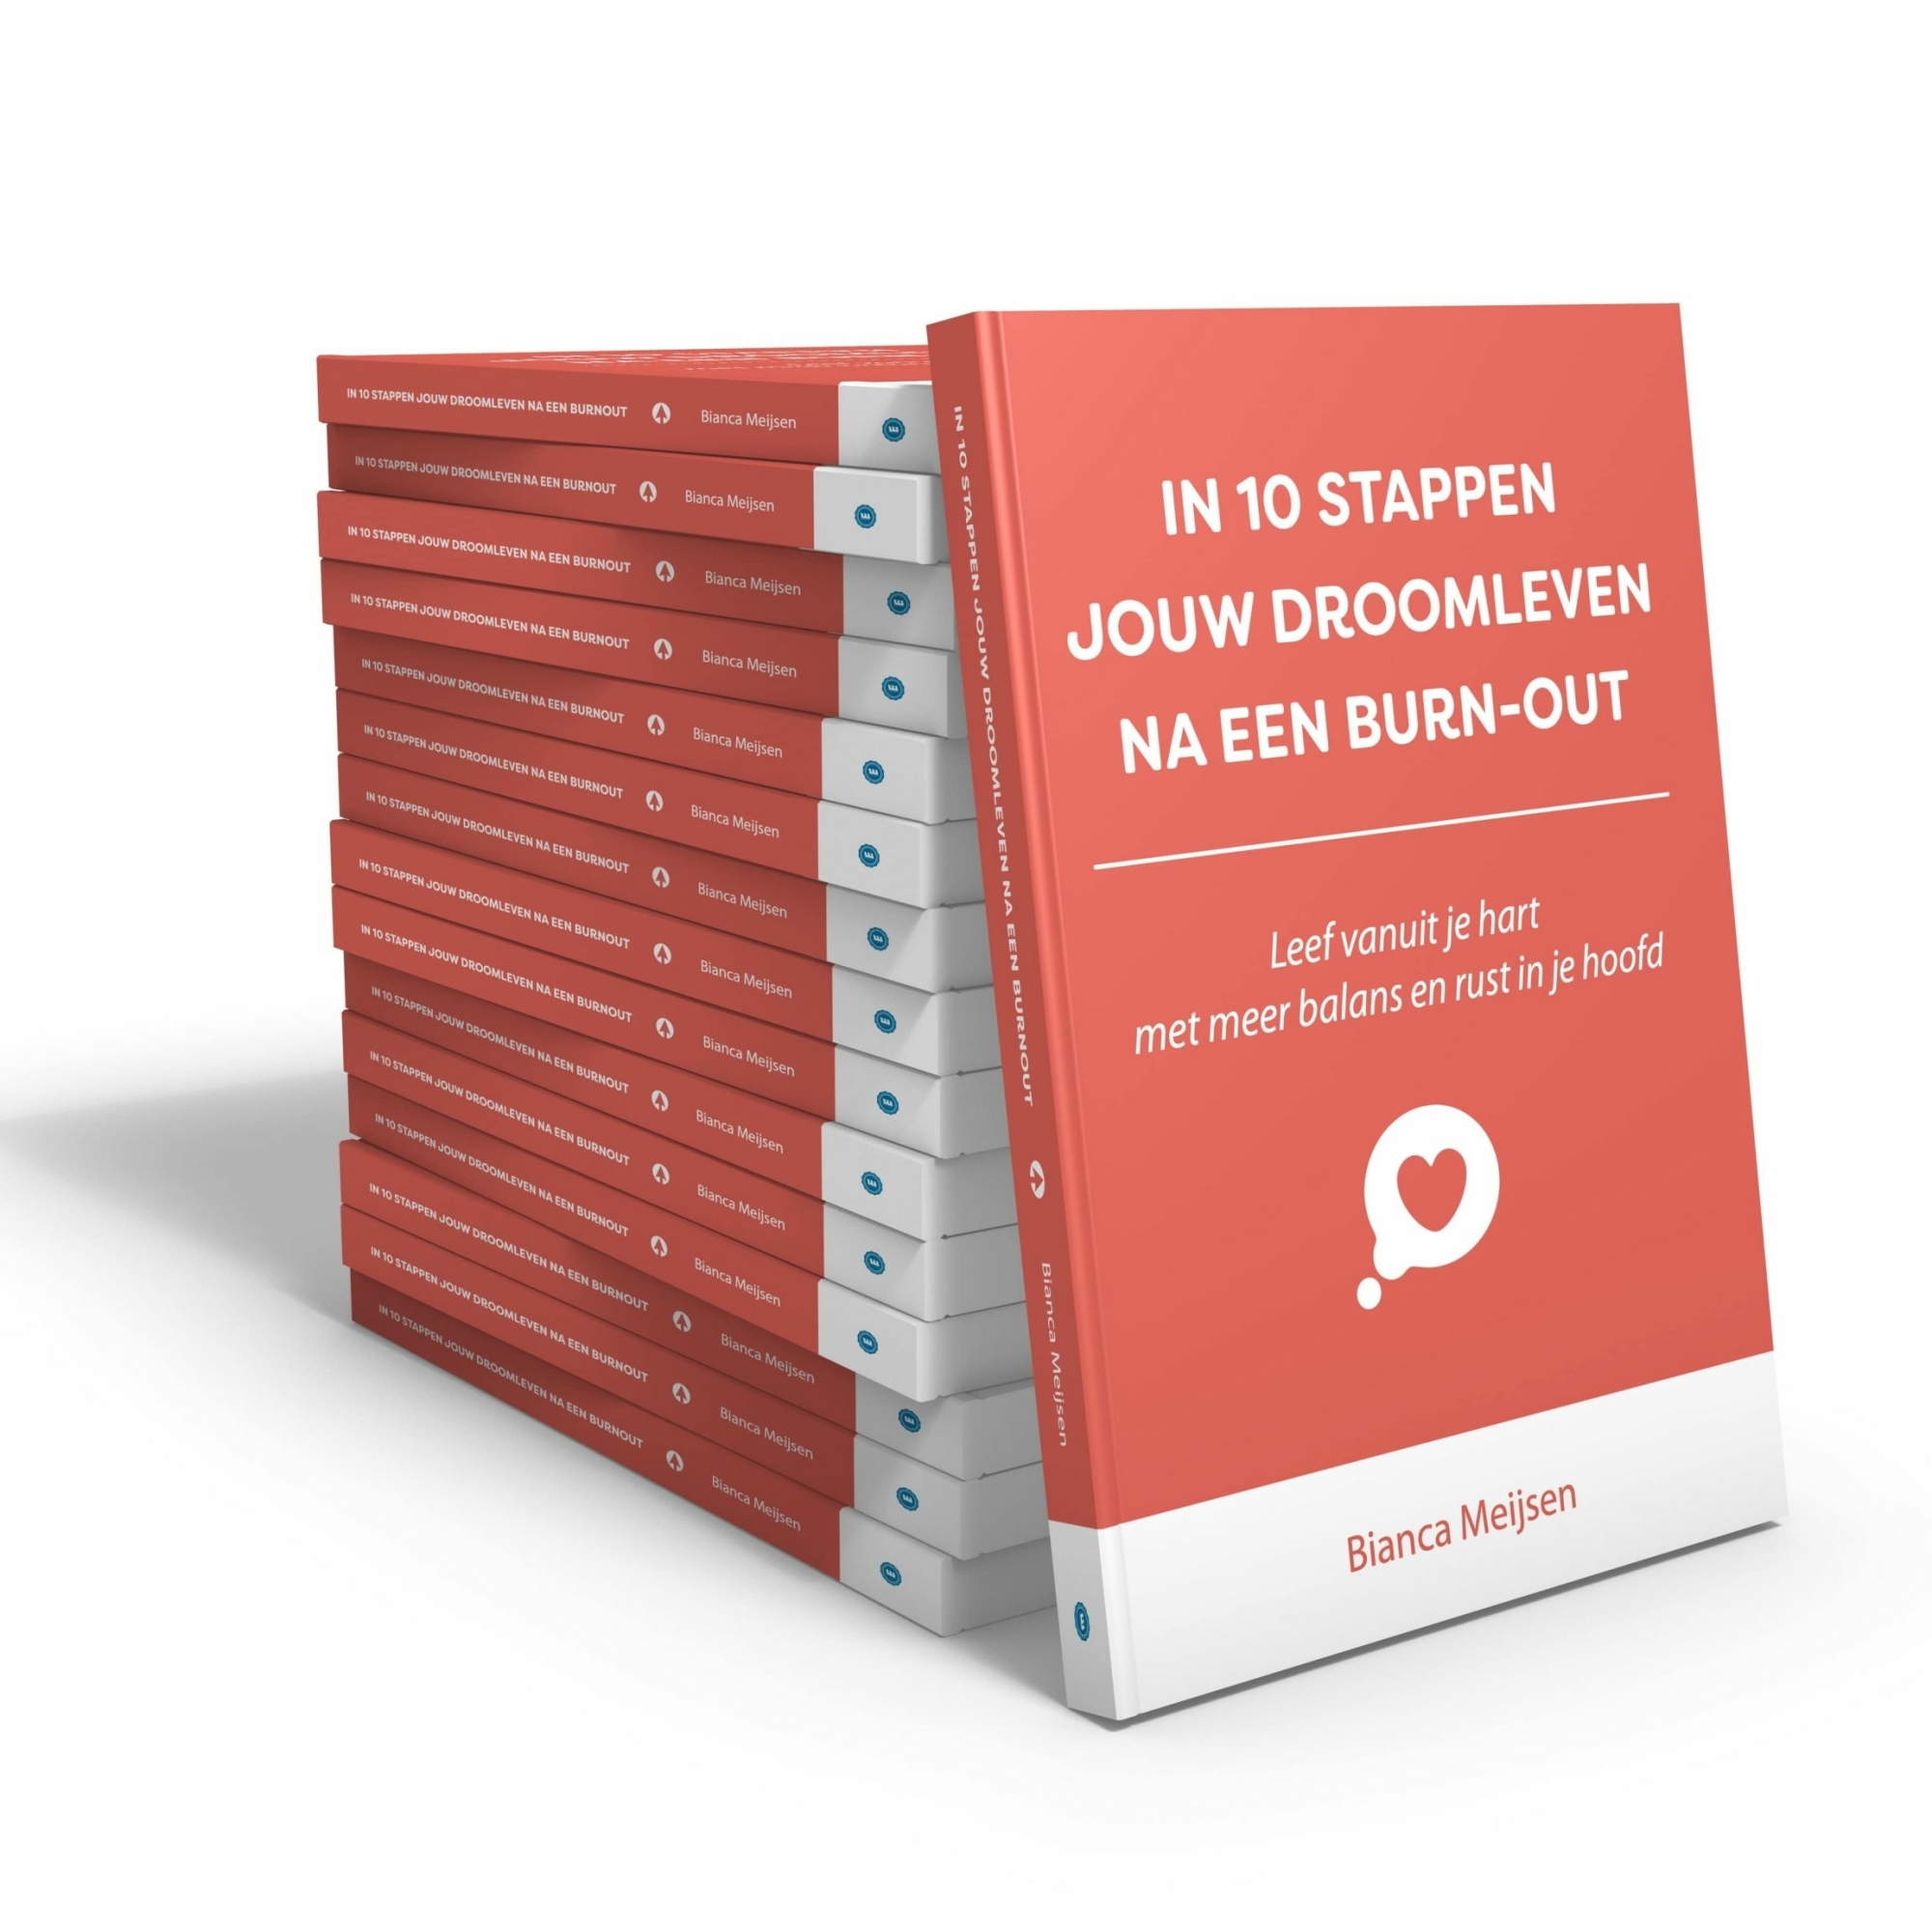 10 stappen droomleven